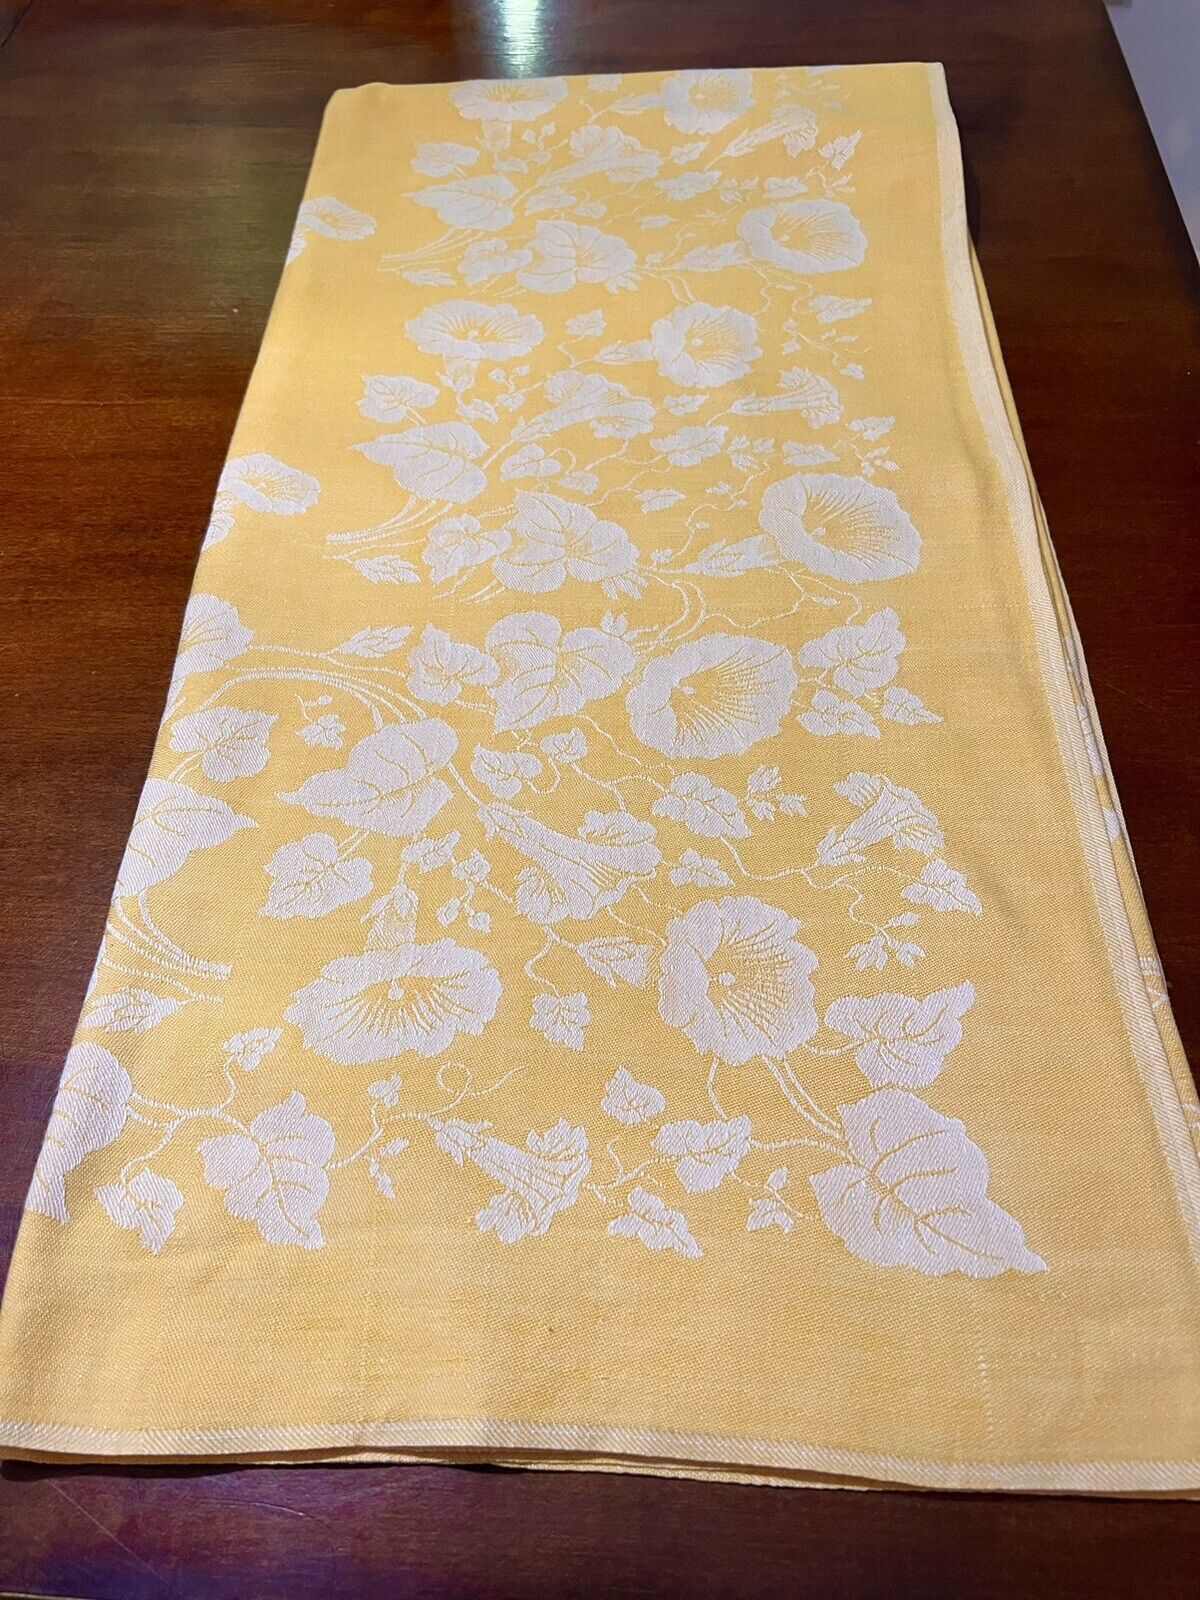 Vintage apricot damask tablecloth morning glories and vines.  56” Sq. cottage